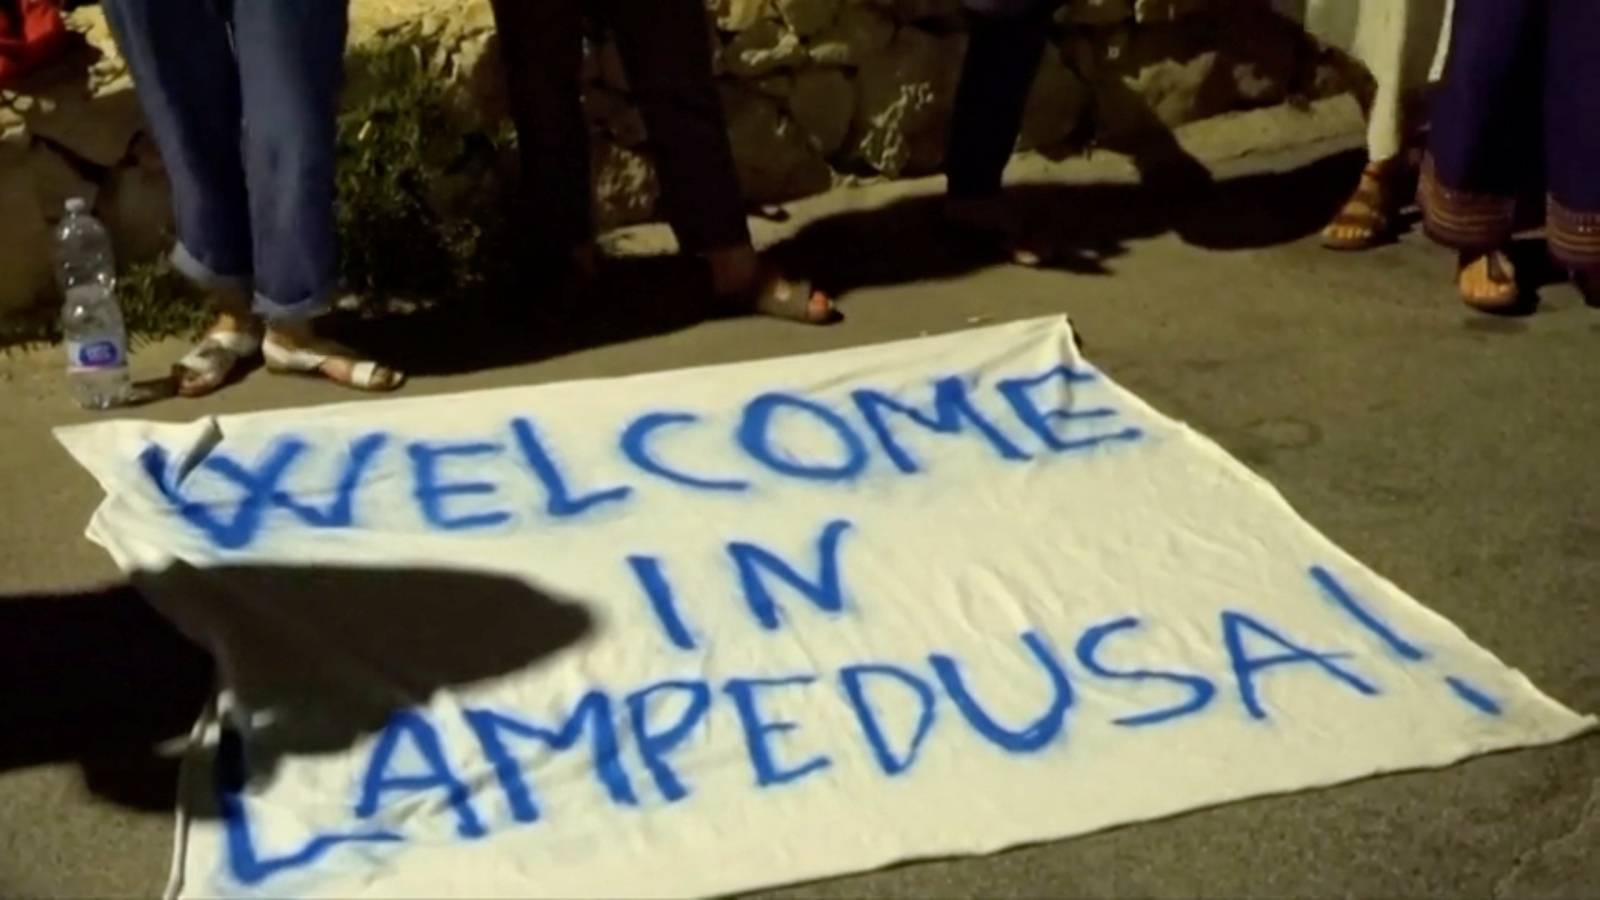 People stand near a banner reading "Welcome in Lampedusa" as migrants disembark a rescue boat in the port of Lampedusa